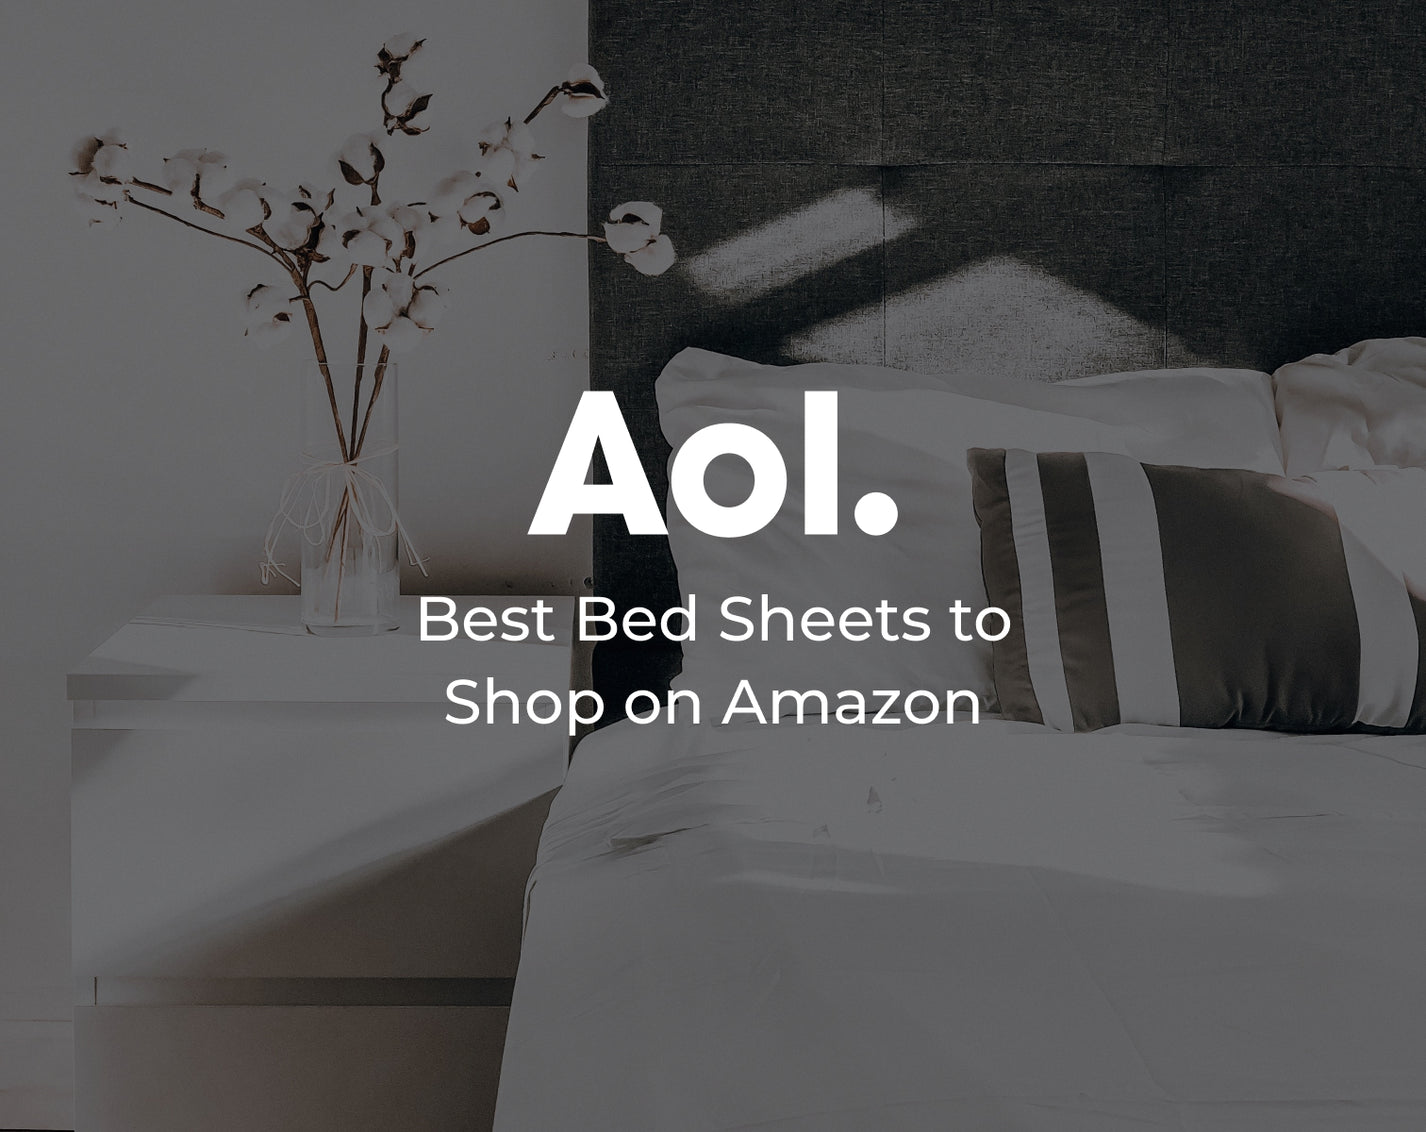 AOL: Best Bed Sheets to Shop on Amazon